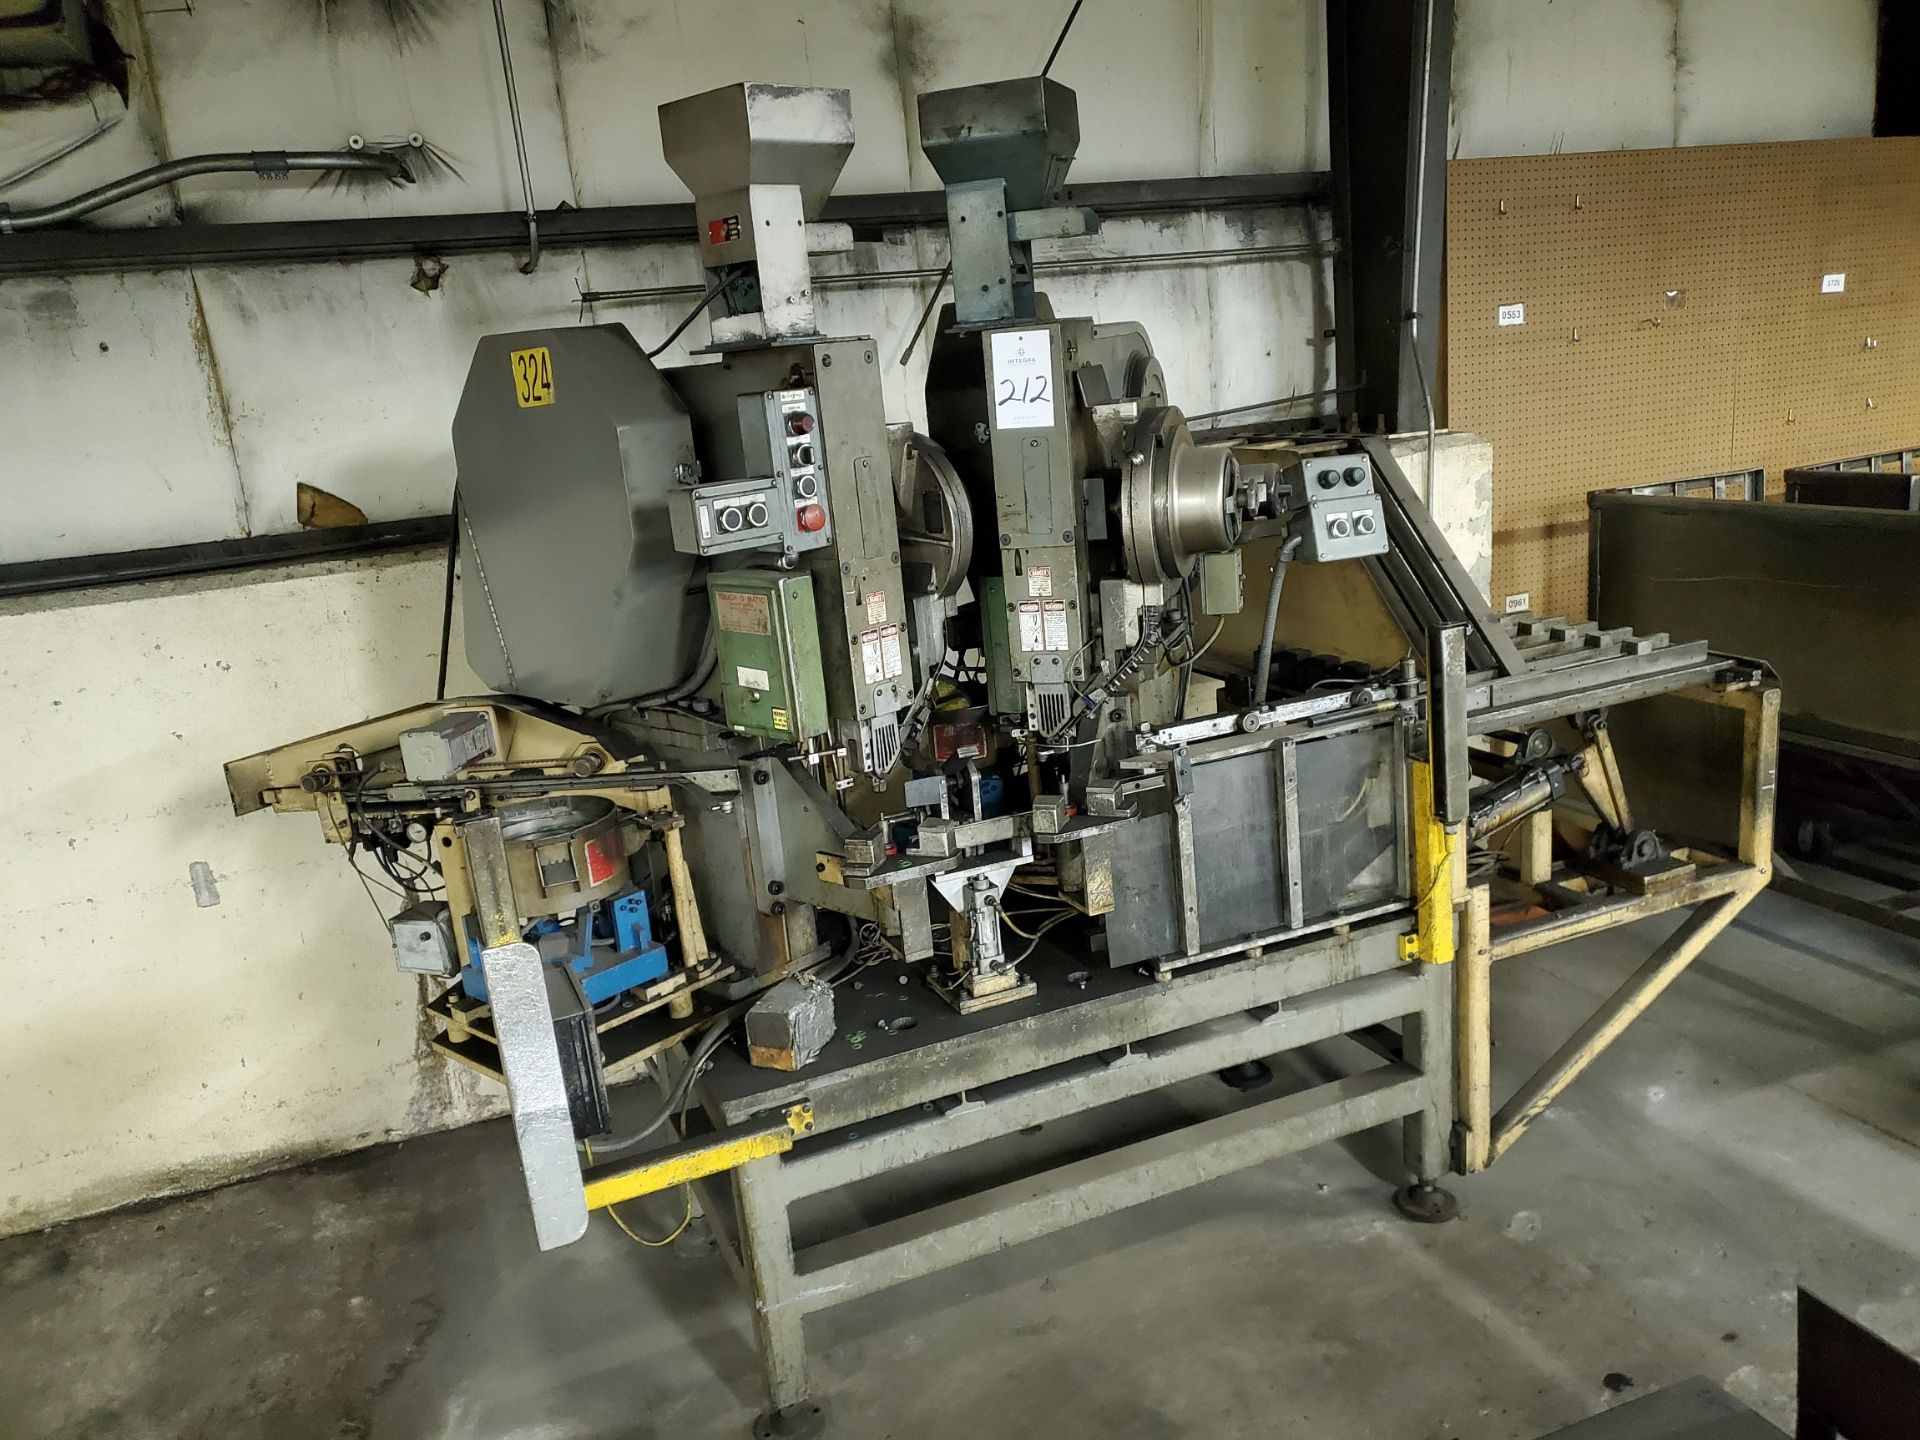 (2) National Rivet & Manufacturing, 1200 Rivet Machine with Rotary Feeder